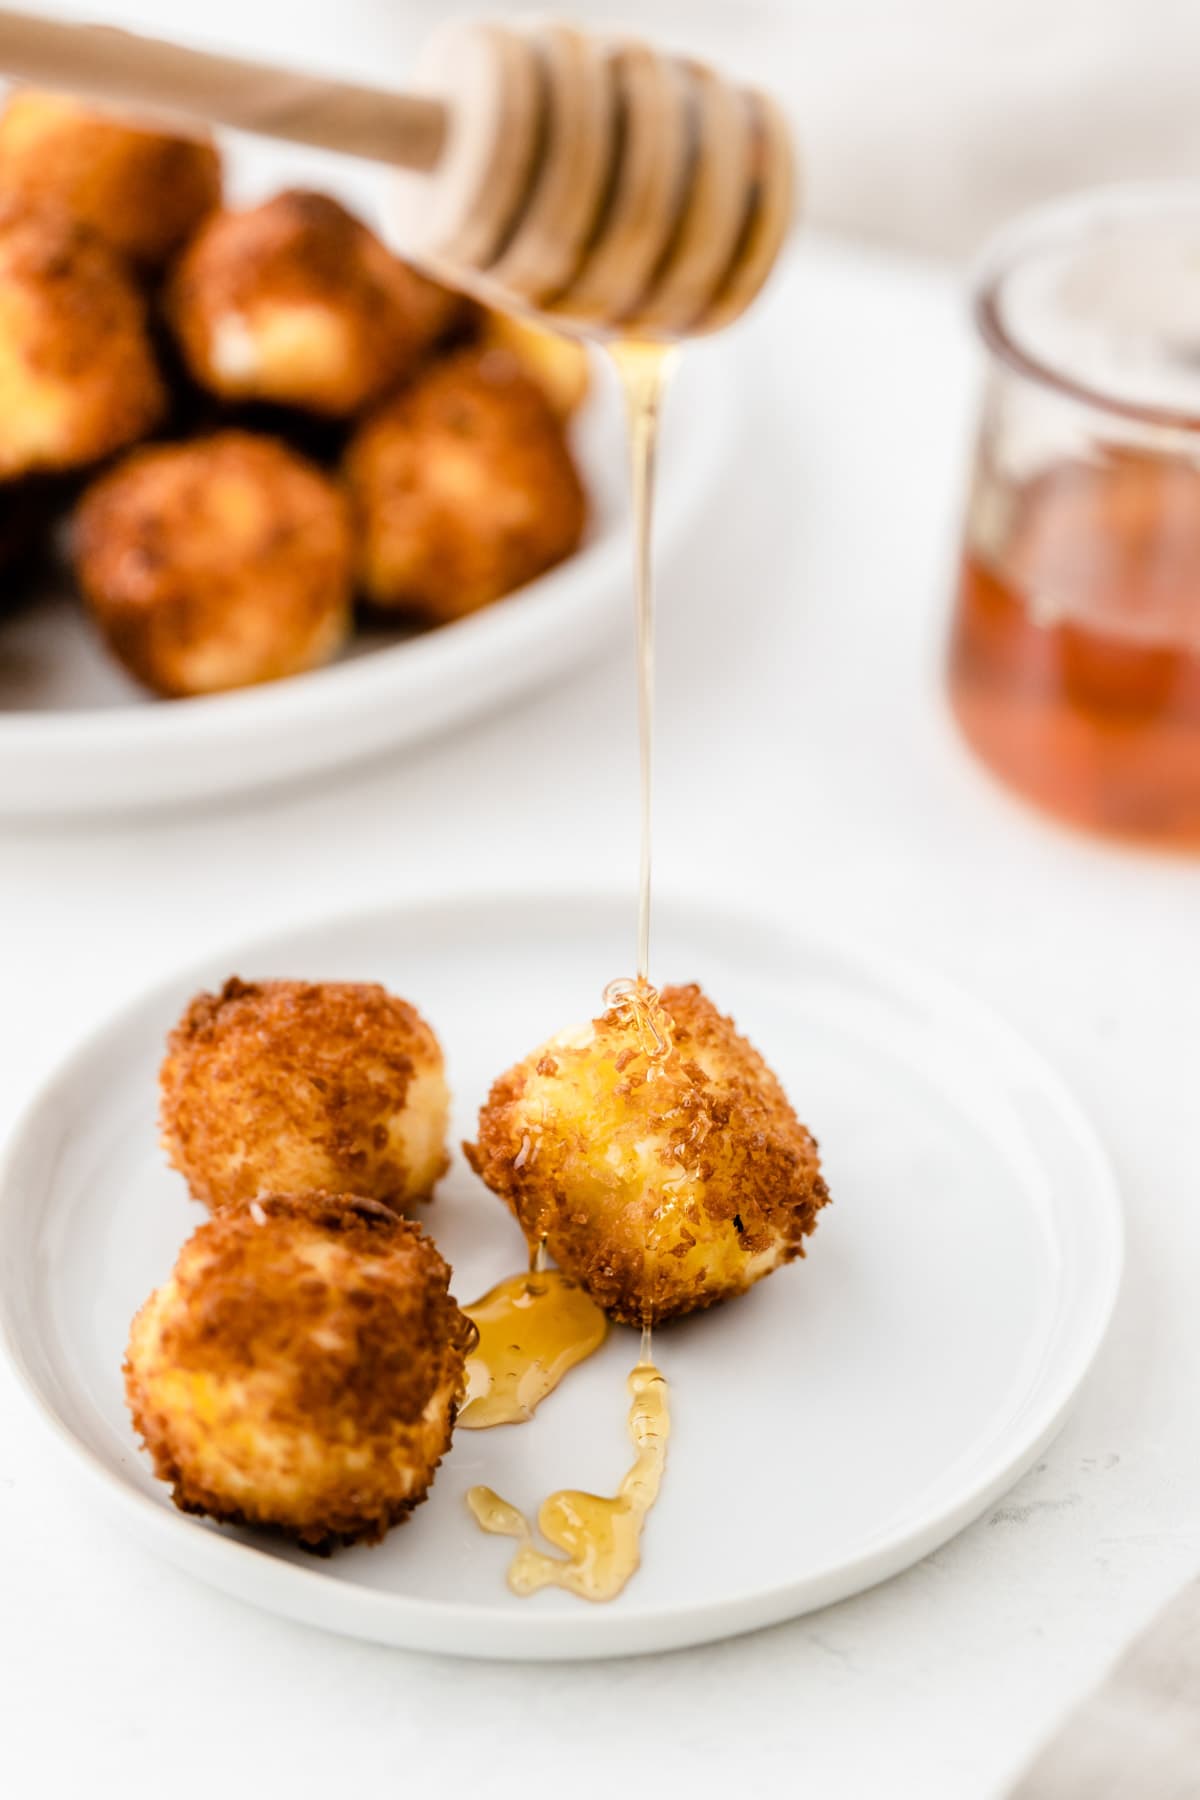 Fried goat cheese drizzled with honey